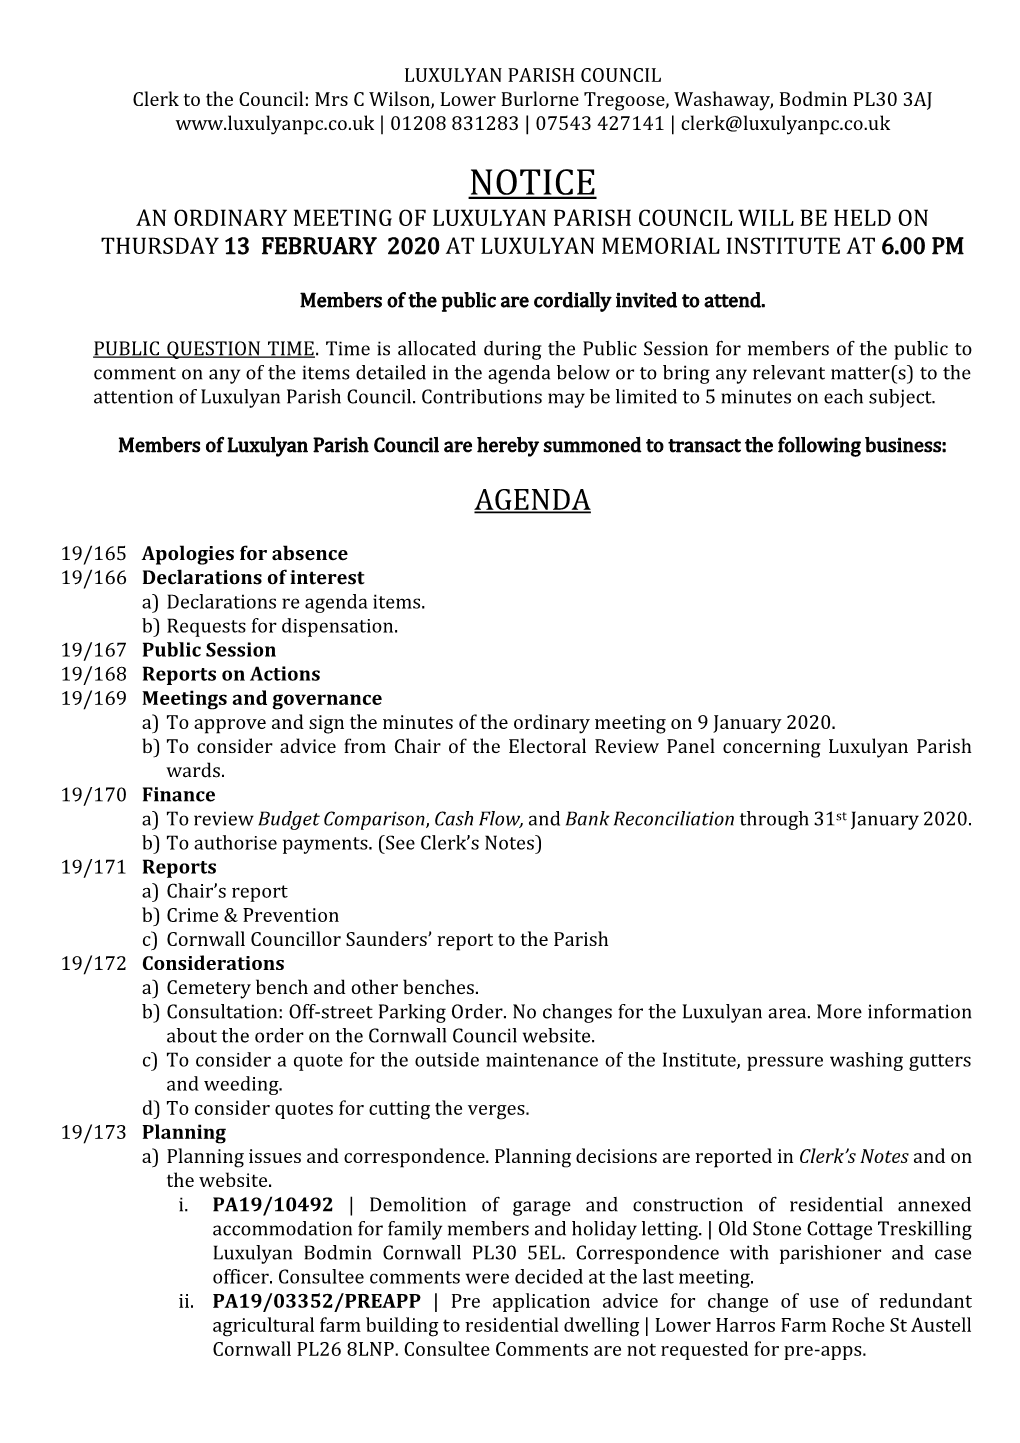 Agenda Below Or to Bring Any Relevant Matter(S) to the Attention of Luxulyan Parish Council